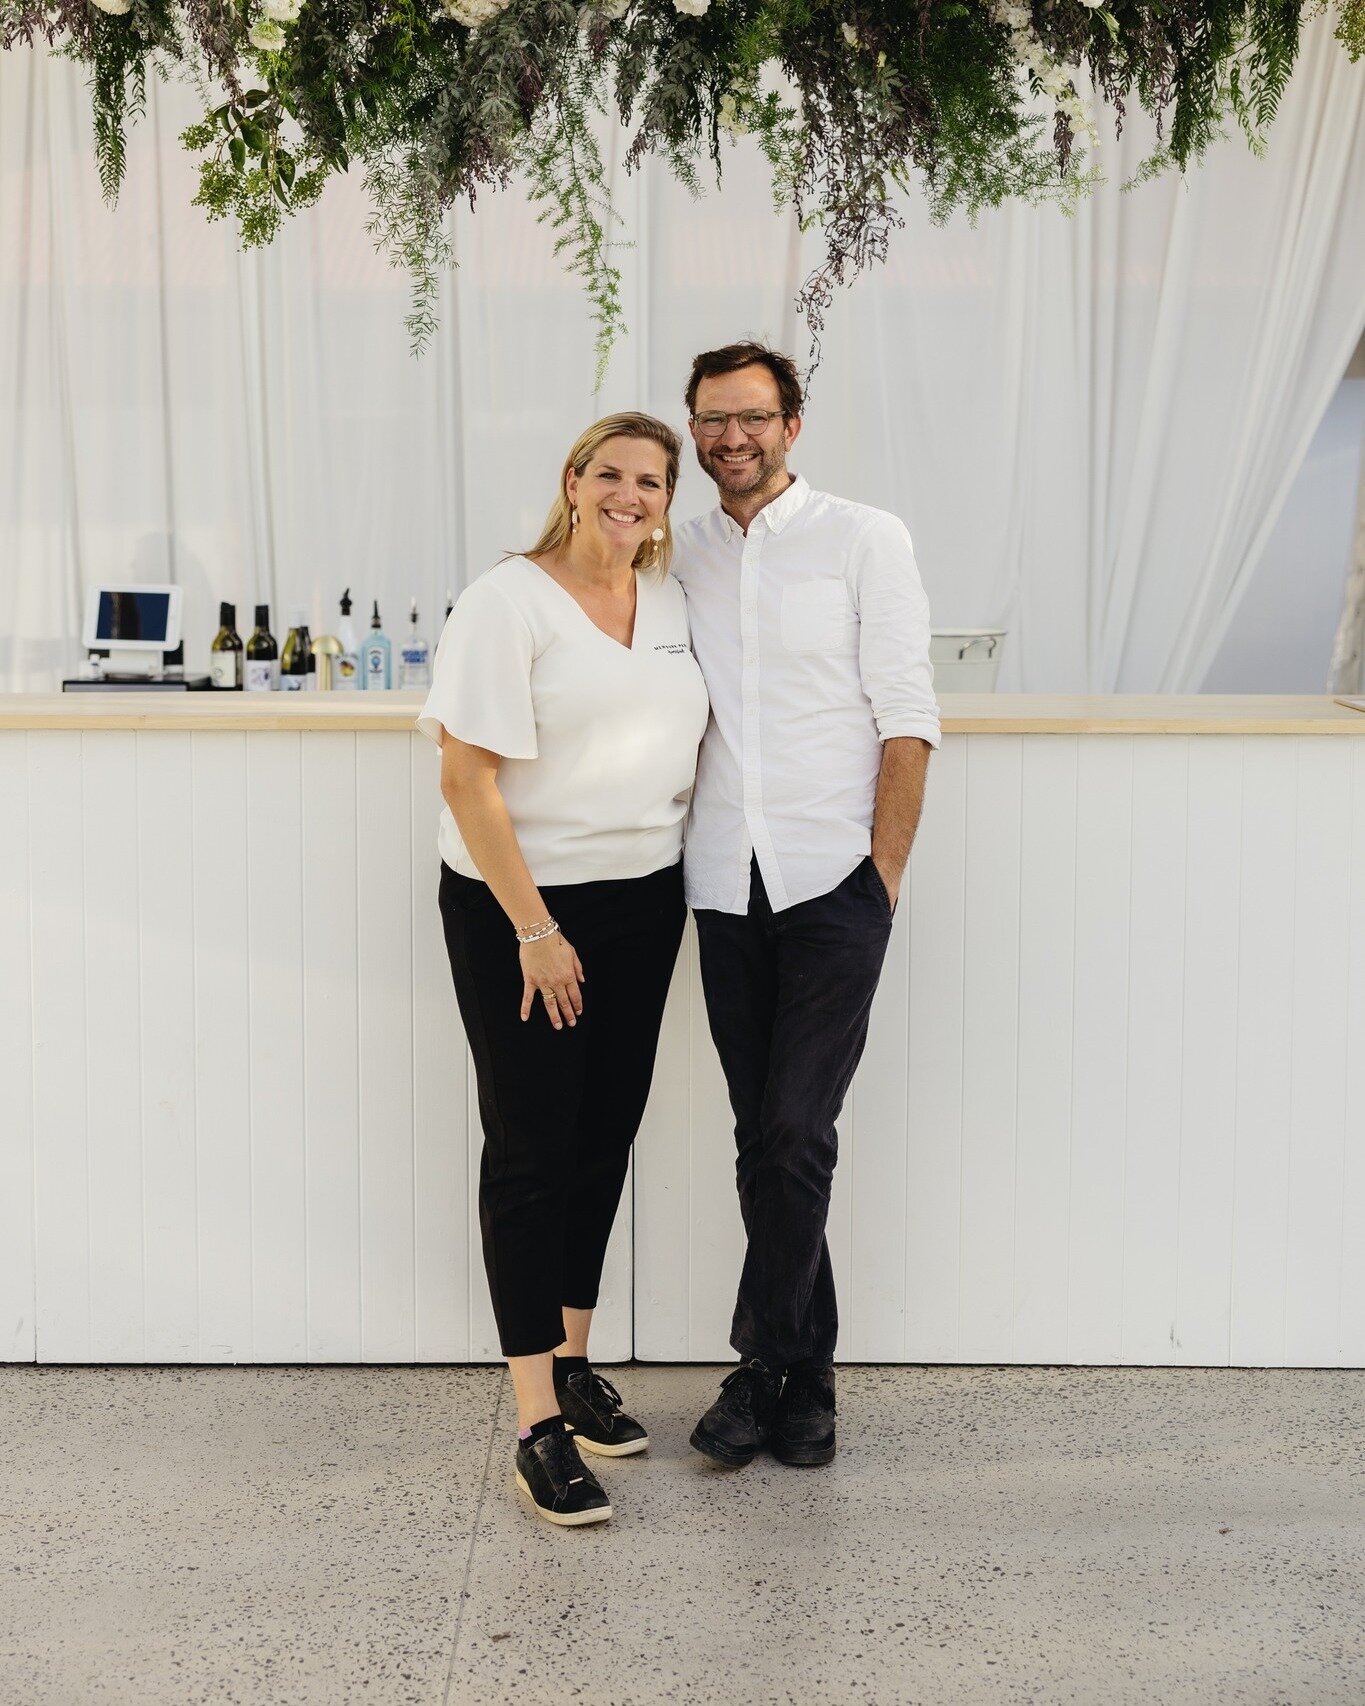 This is us (for all the new followers) -  we are Adam &amp; Julia, owners and operators of Mewburn Park wedding &amp; events. 

Fun fact, we actually fell in love dreaming about what we can do with this property. 💗 That was 15 years ago. A detour vi